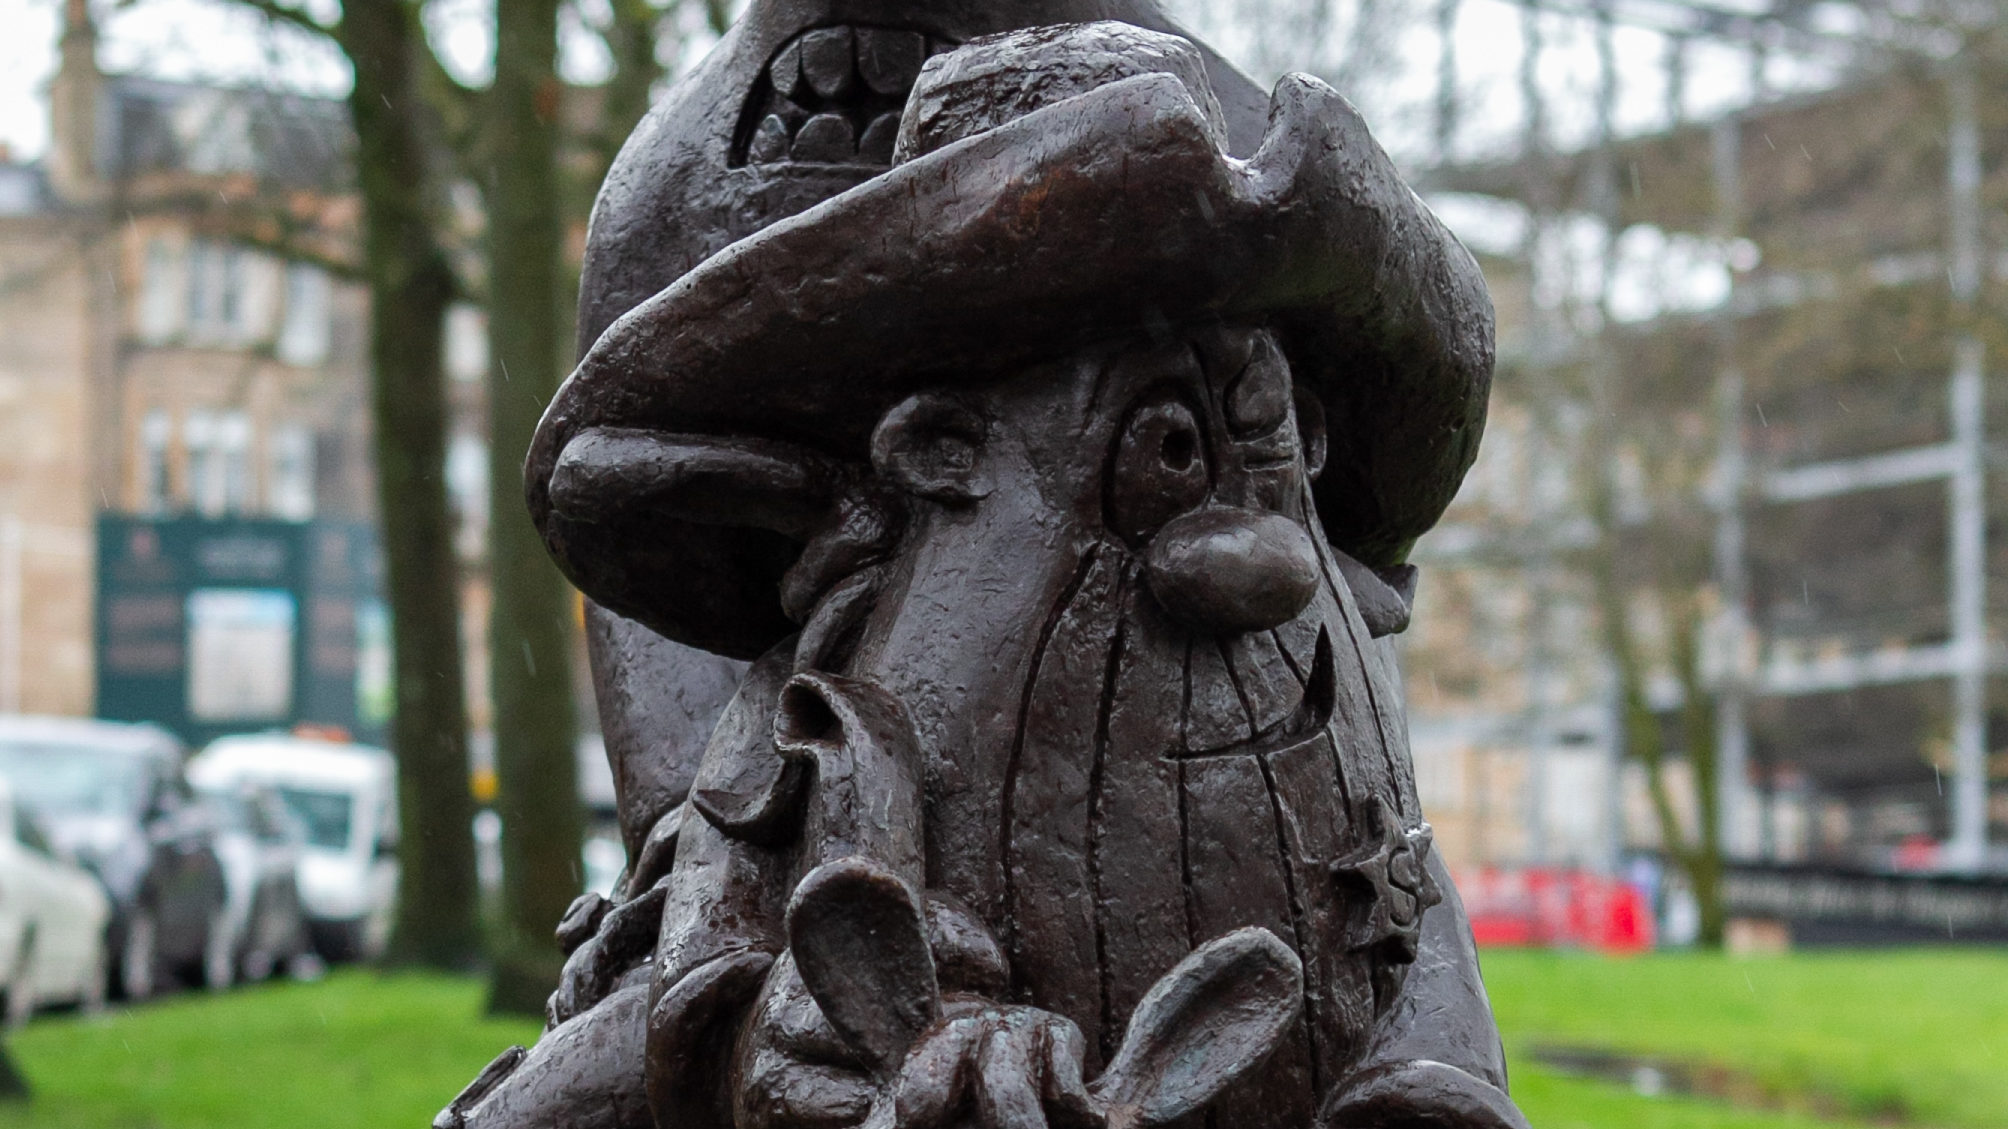 Lobey Dosser statue in Glasgow (Andrew Cawley / DCT Media)